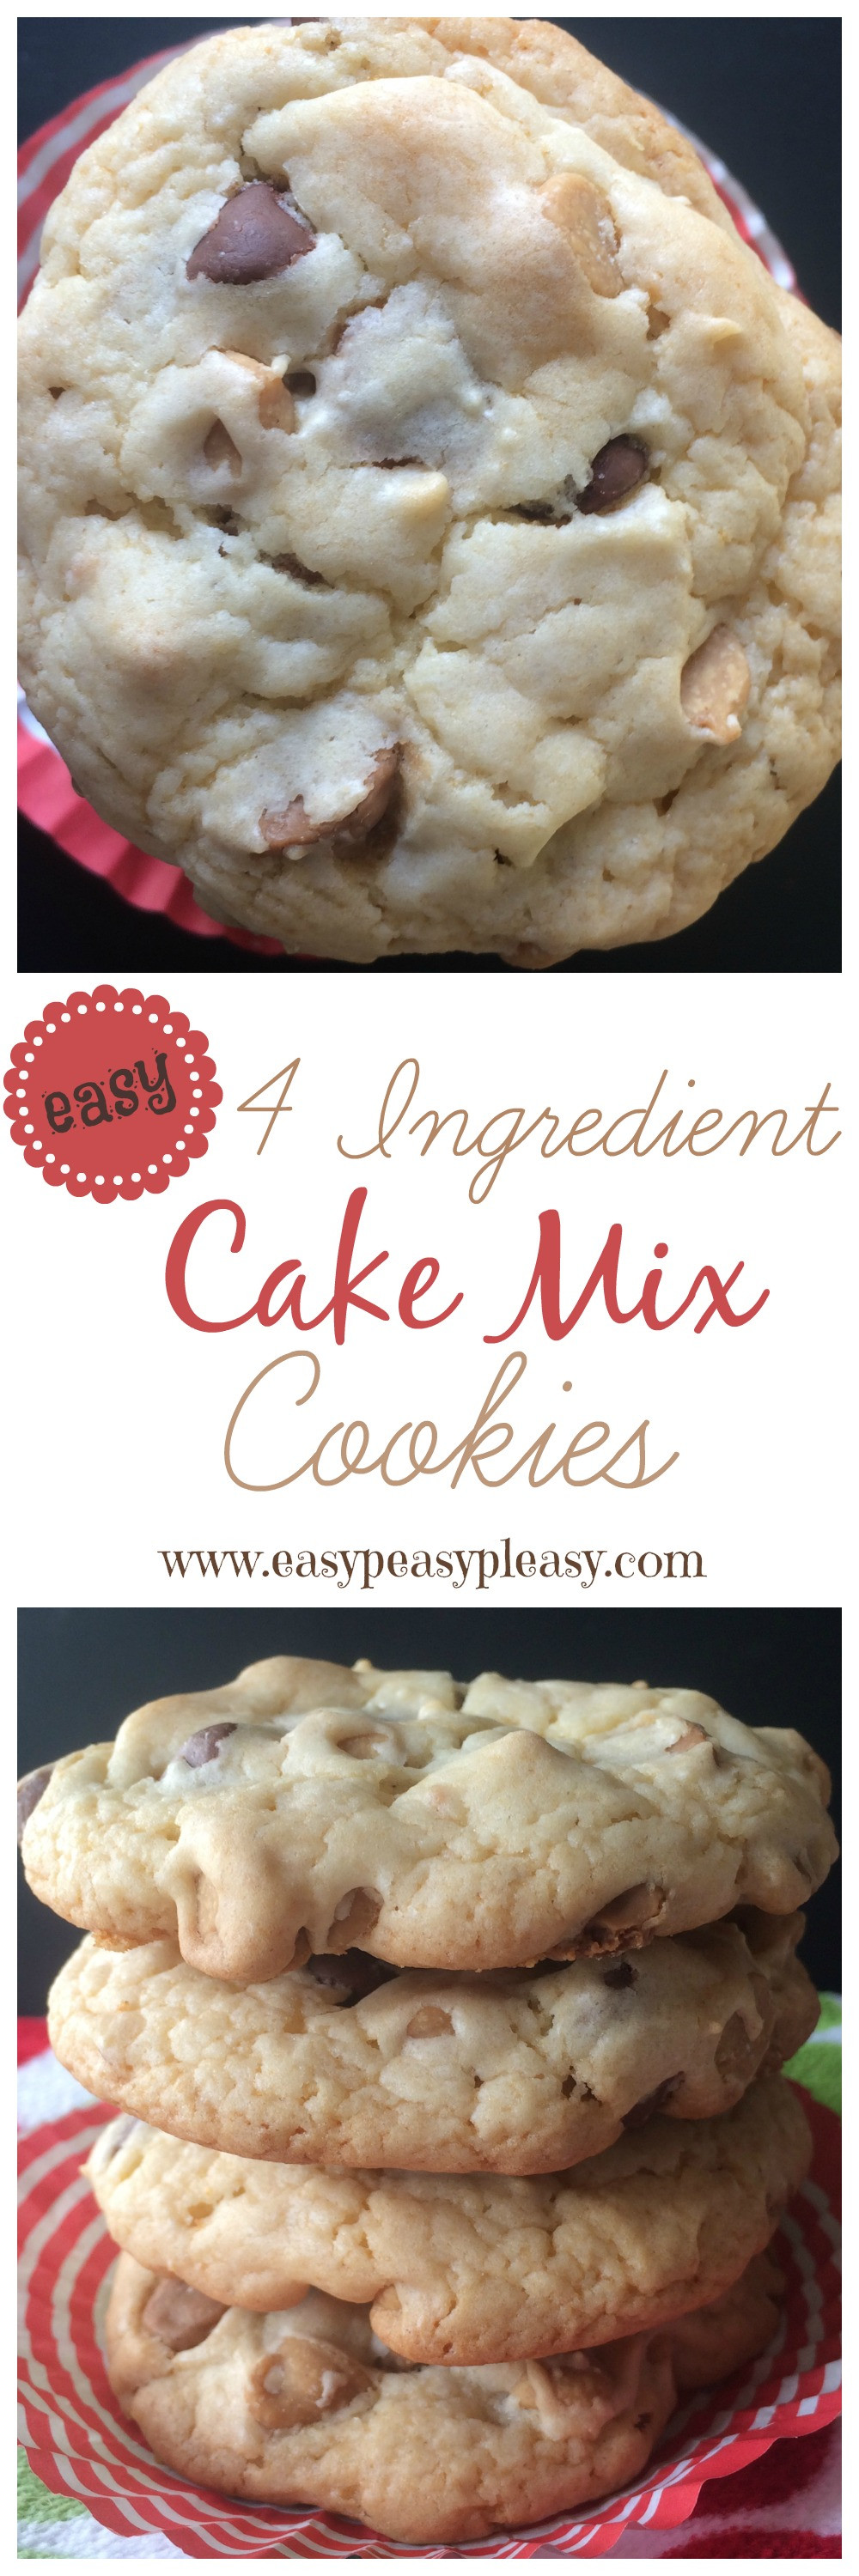 Making Cookies From Cake Mix
 How To Make Cookies From A Box Cake Mix Easy Peasy Pleasy